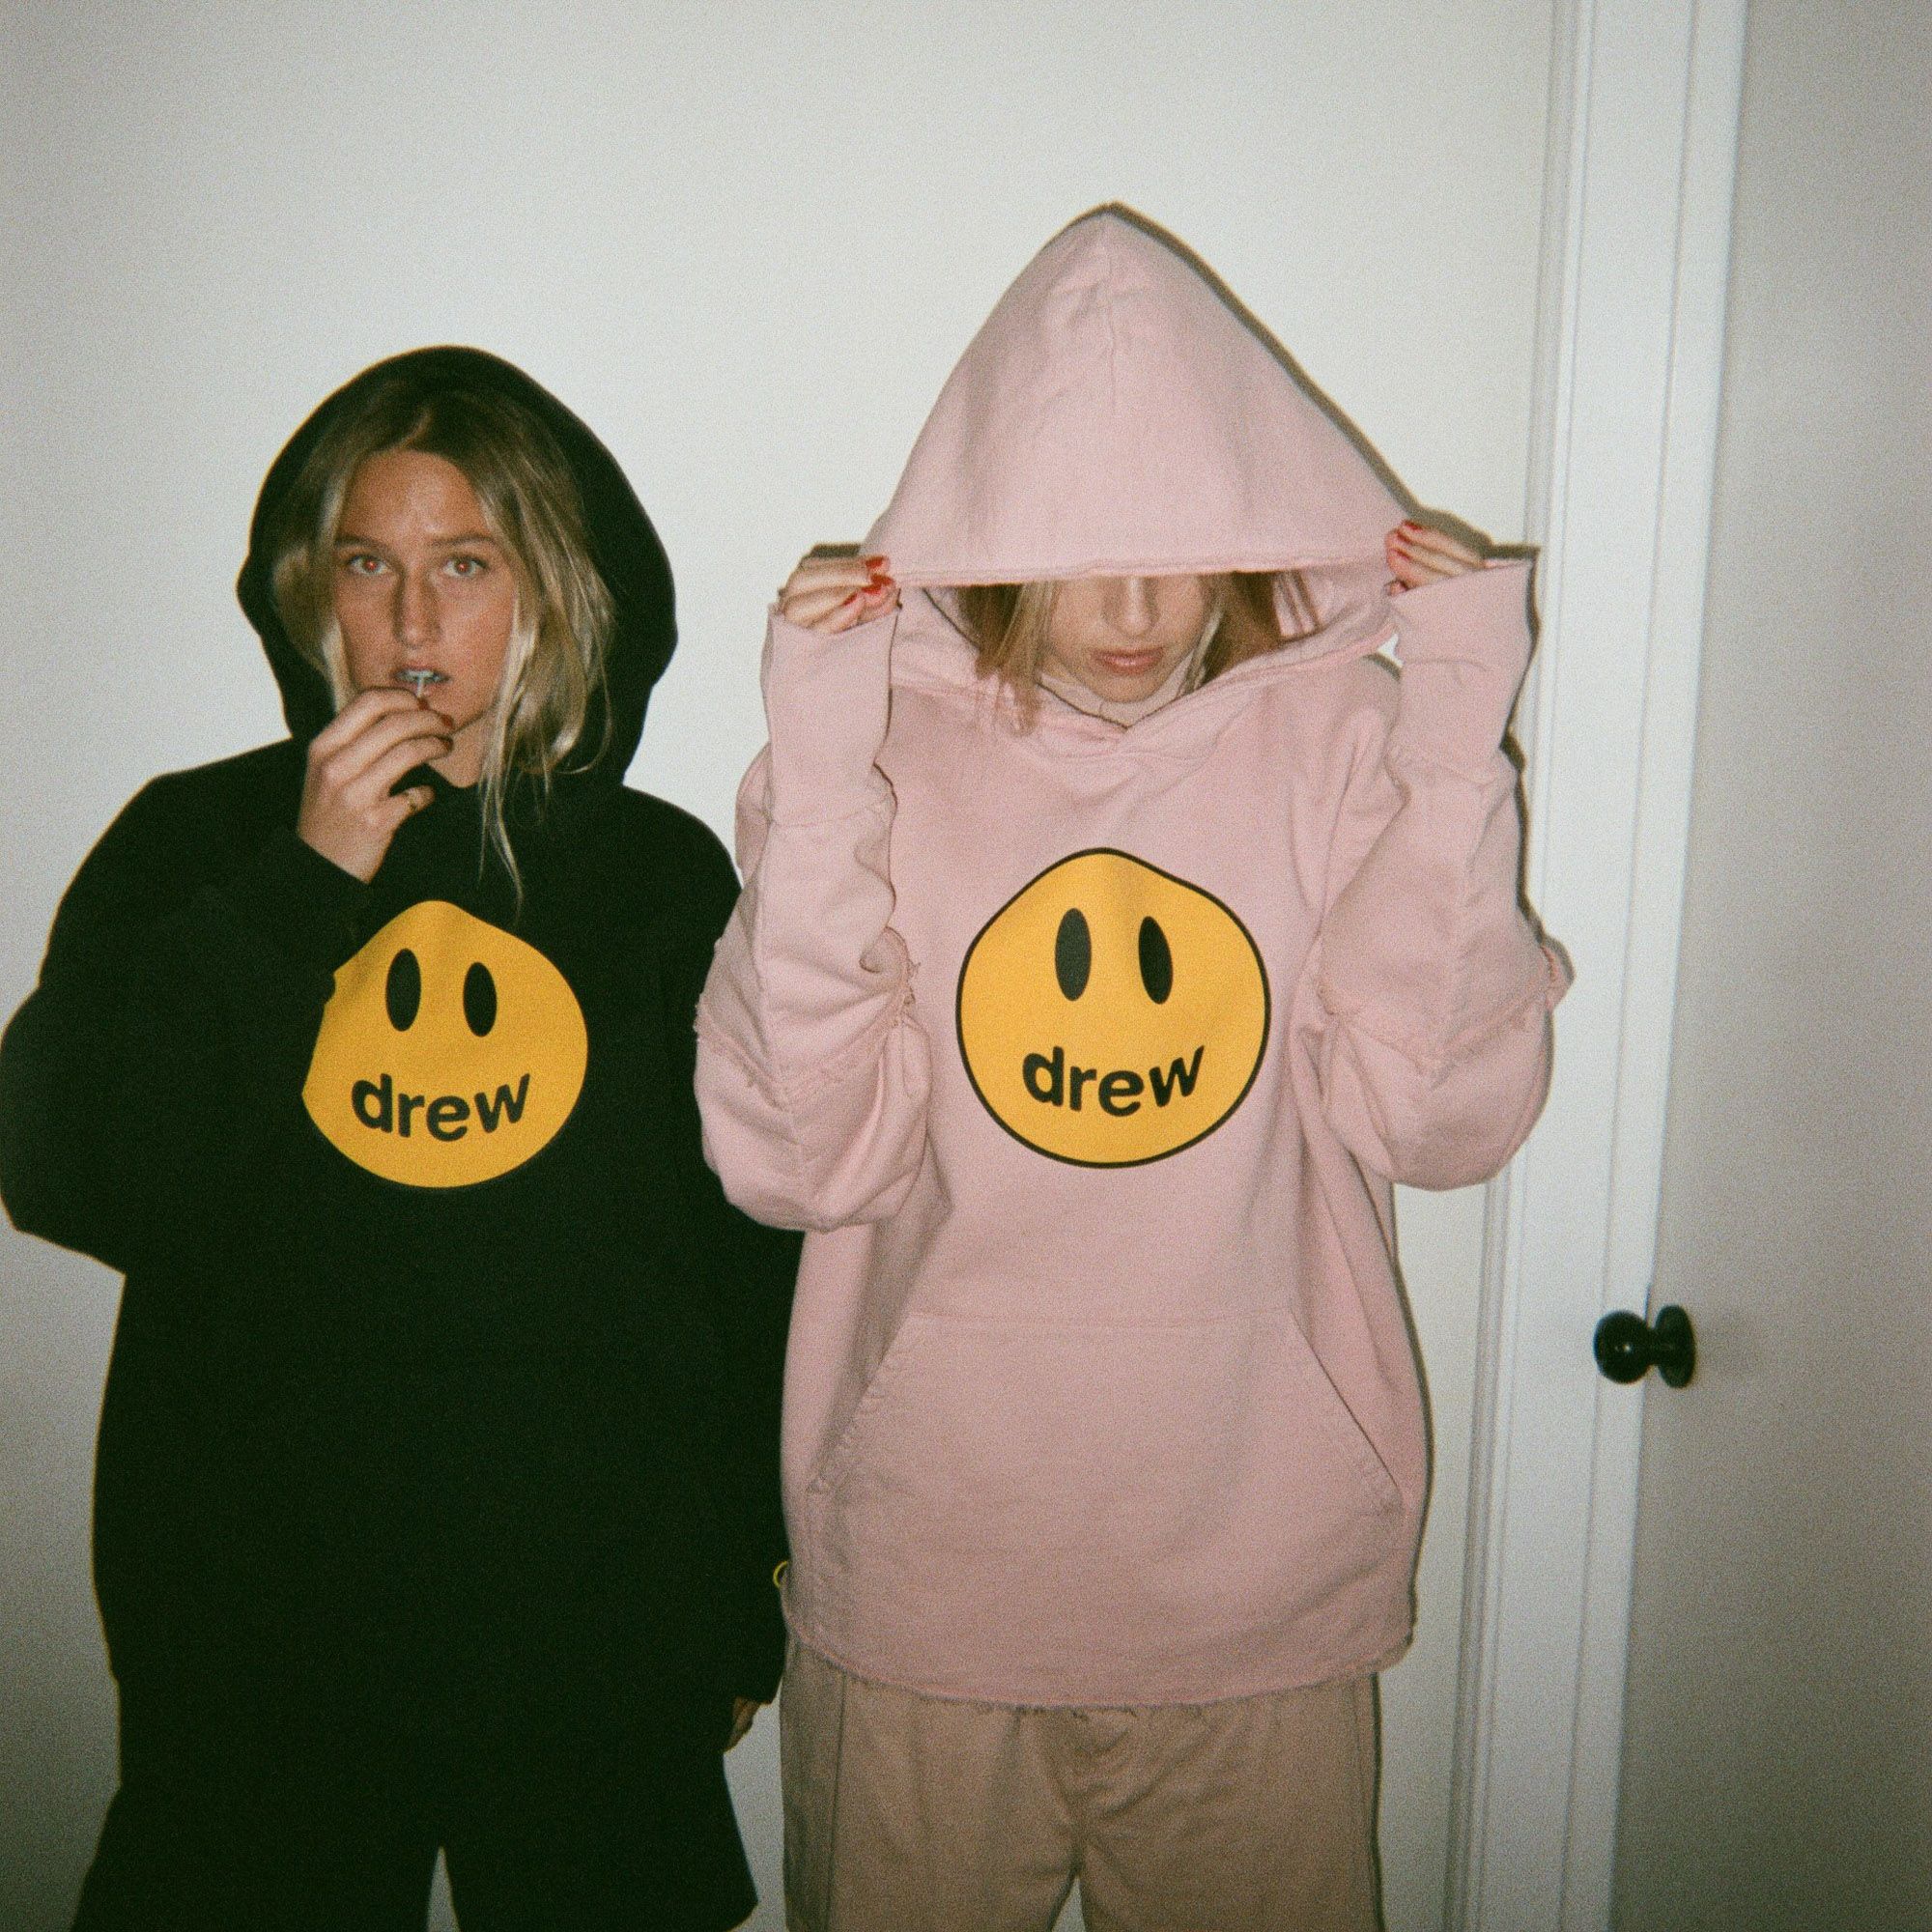  Drew House Deconstructed Mascot Hoodie - Dusty Rose 